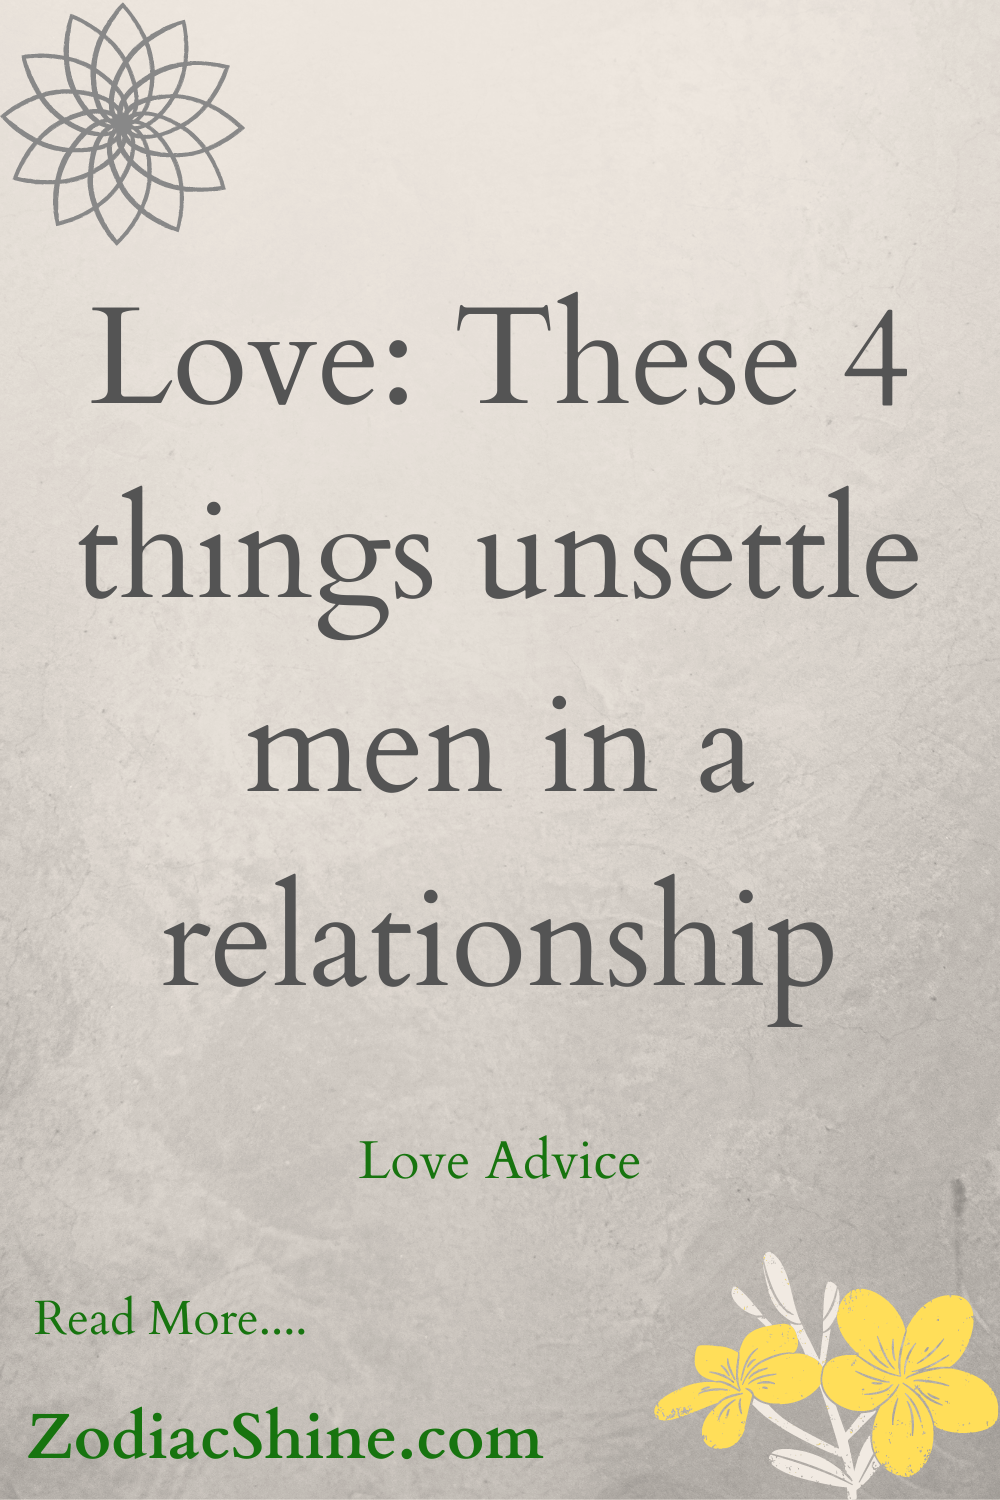 Love: These 4 things unsettle men in a relationship